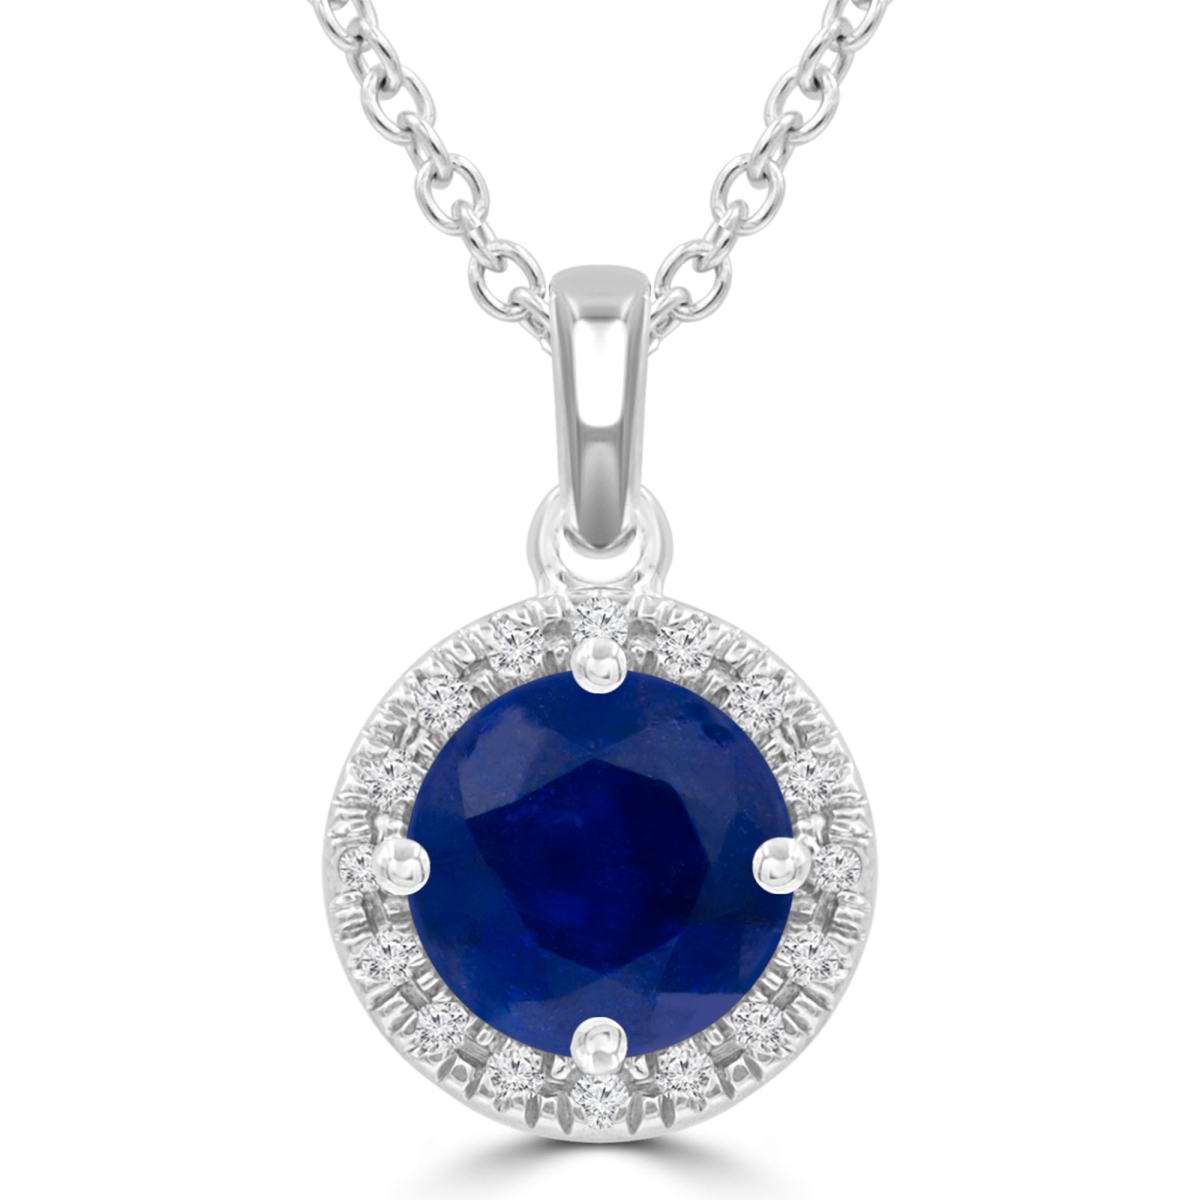 Picture of Majesty Diamonds MDR220190 1.25 CTW Round Blue Sapphire Halo Pendant Necklace in 14K White Gold